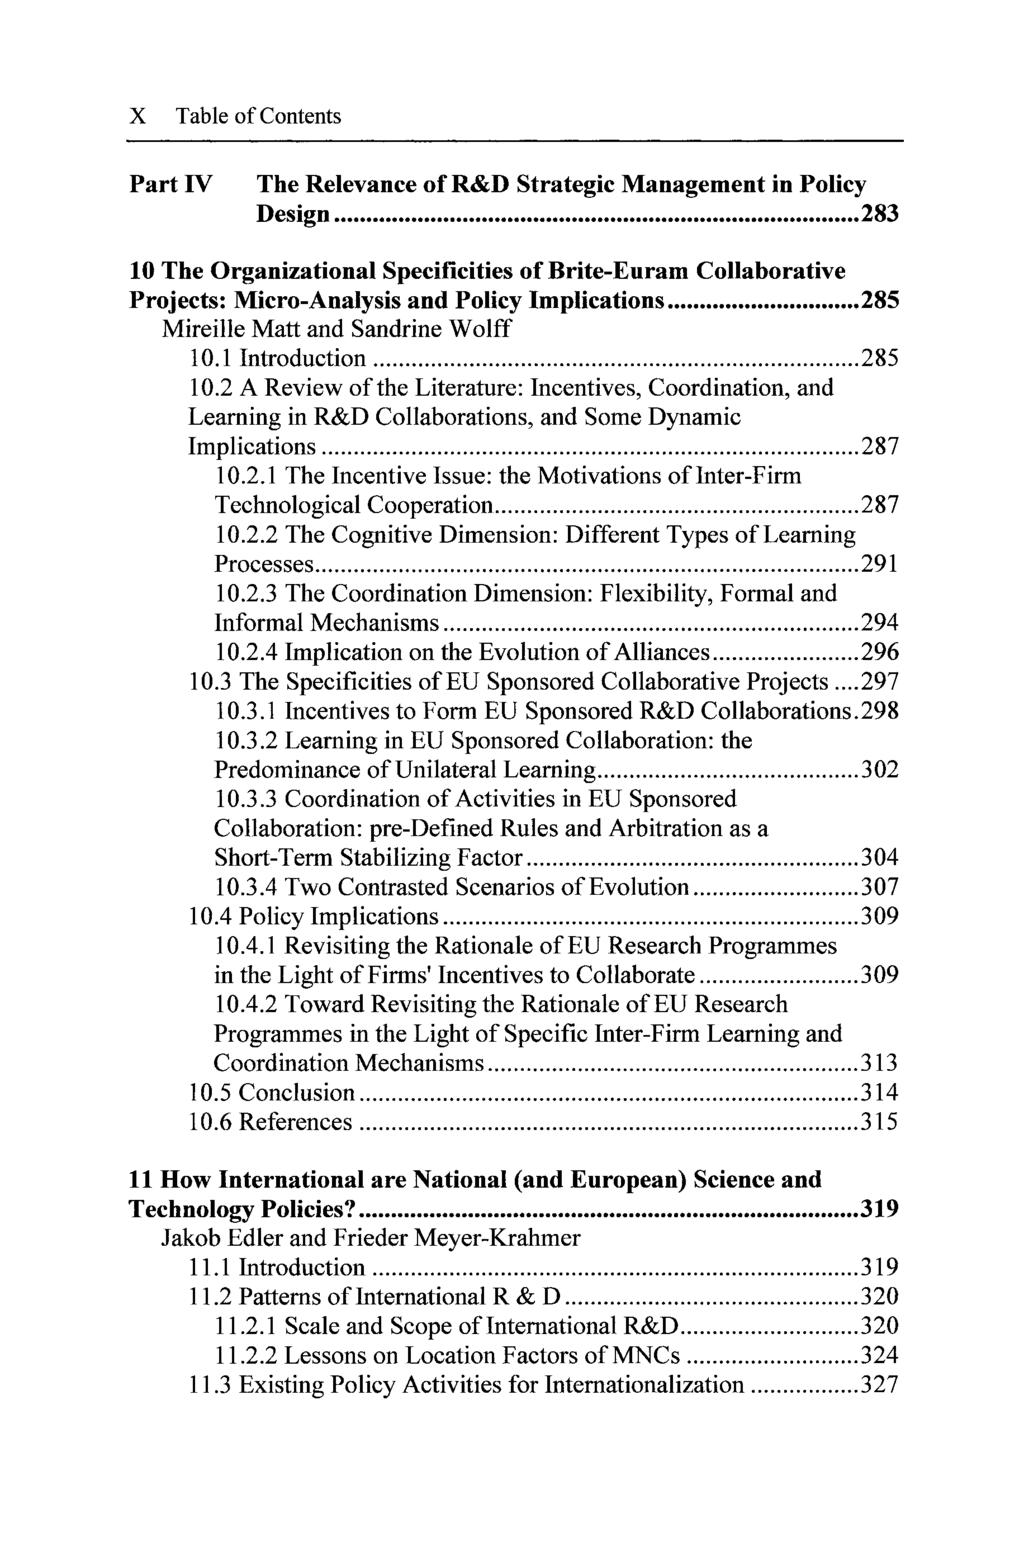 X Table of Contents Part rv The Relevance of R&D Strategic Management in Policy Design 283 10 The Organizational Specificities of Brite-Euram Collaborative Projects: Micro-Analysis and Policy